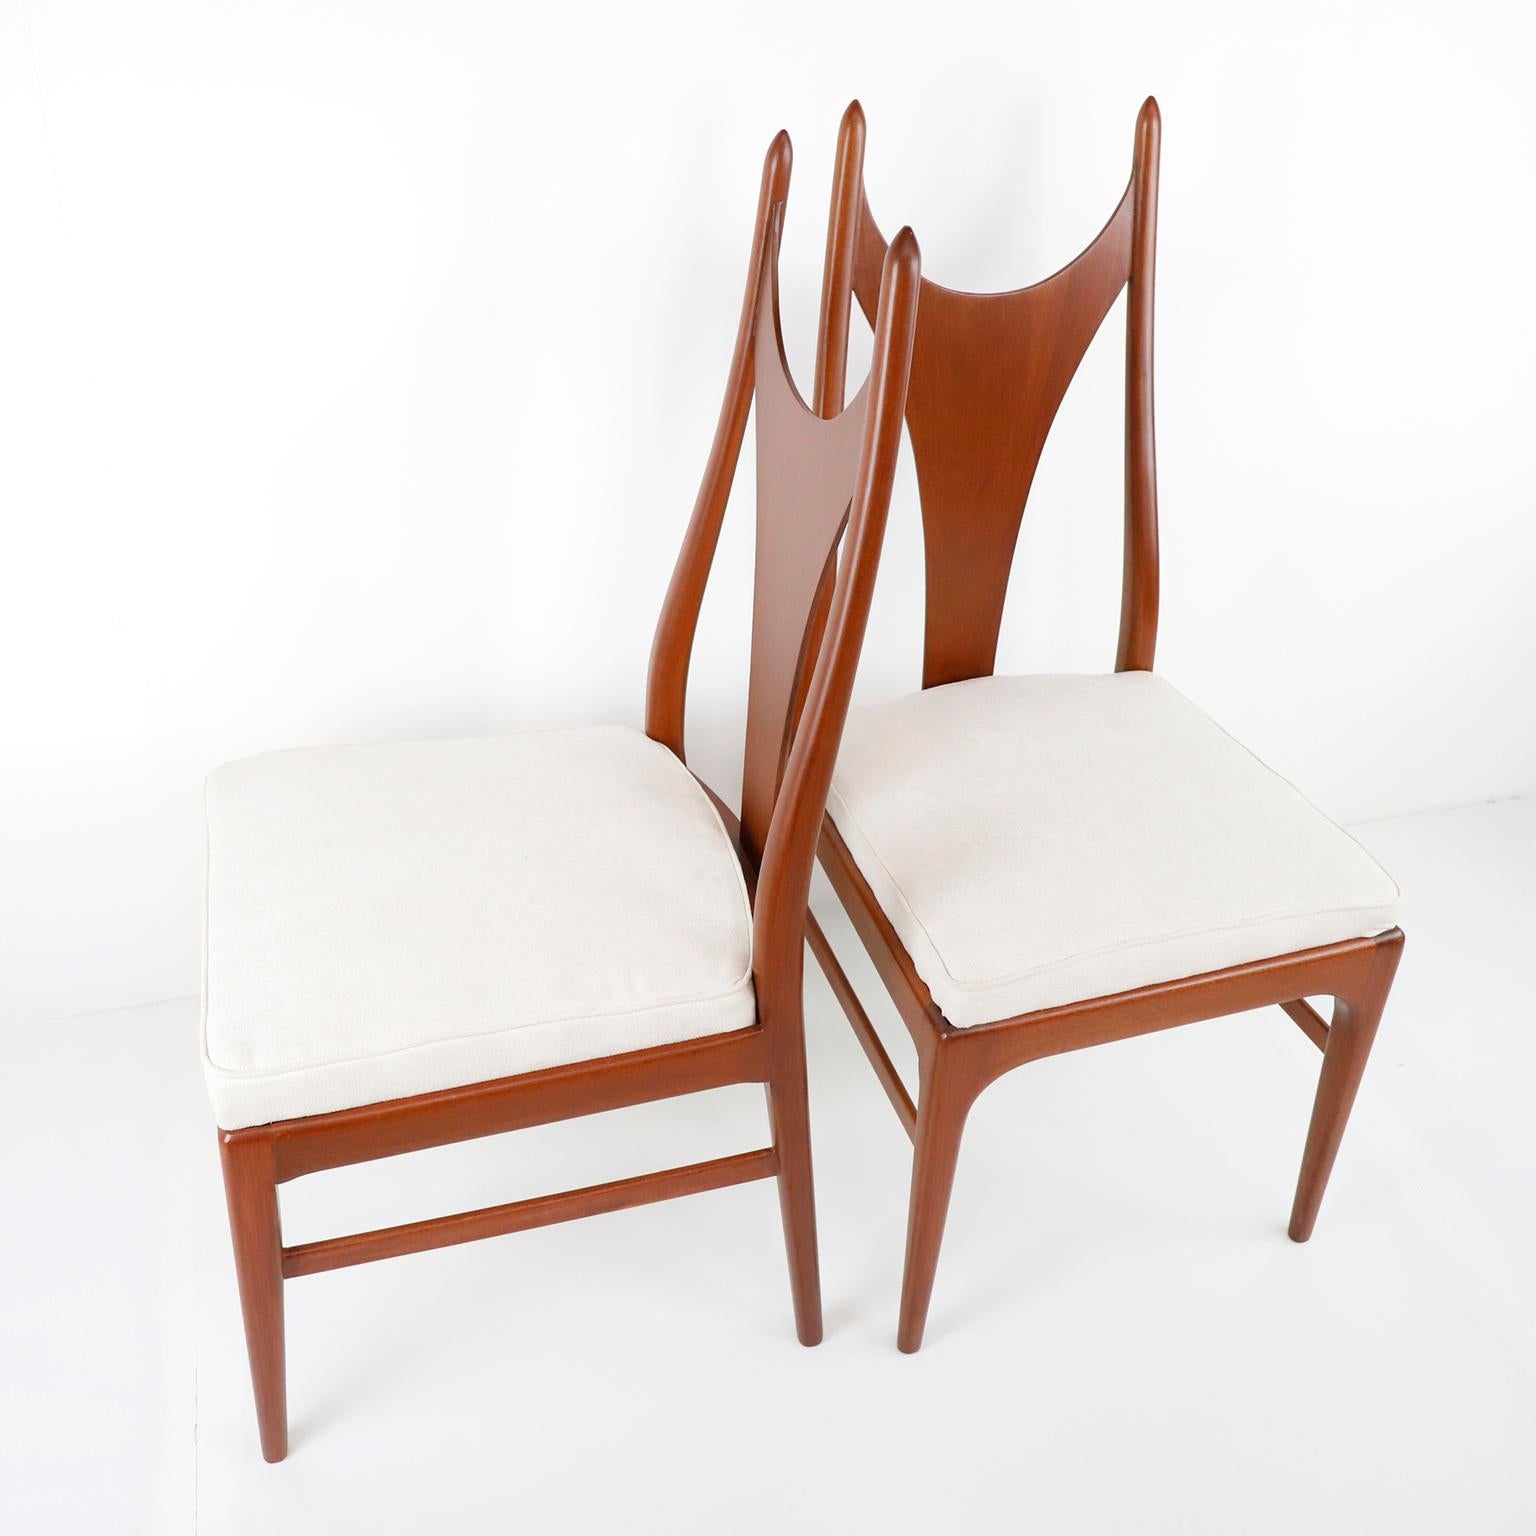 Circa 1960, we offer this set of 4 original midcentury Mexican chairs designed by Eugenio Escudero for D’Escudero, S.A. This stunning chairs features a fantastic mahogany wood frame with sculptural, clean lines, recently upholstered.
.

About